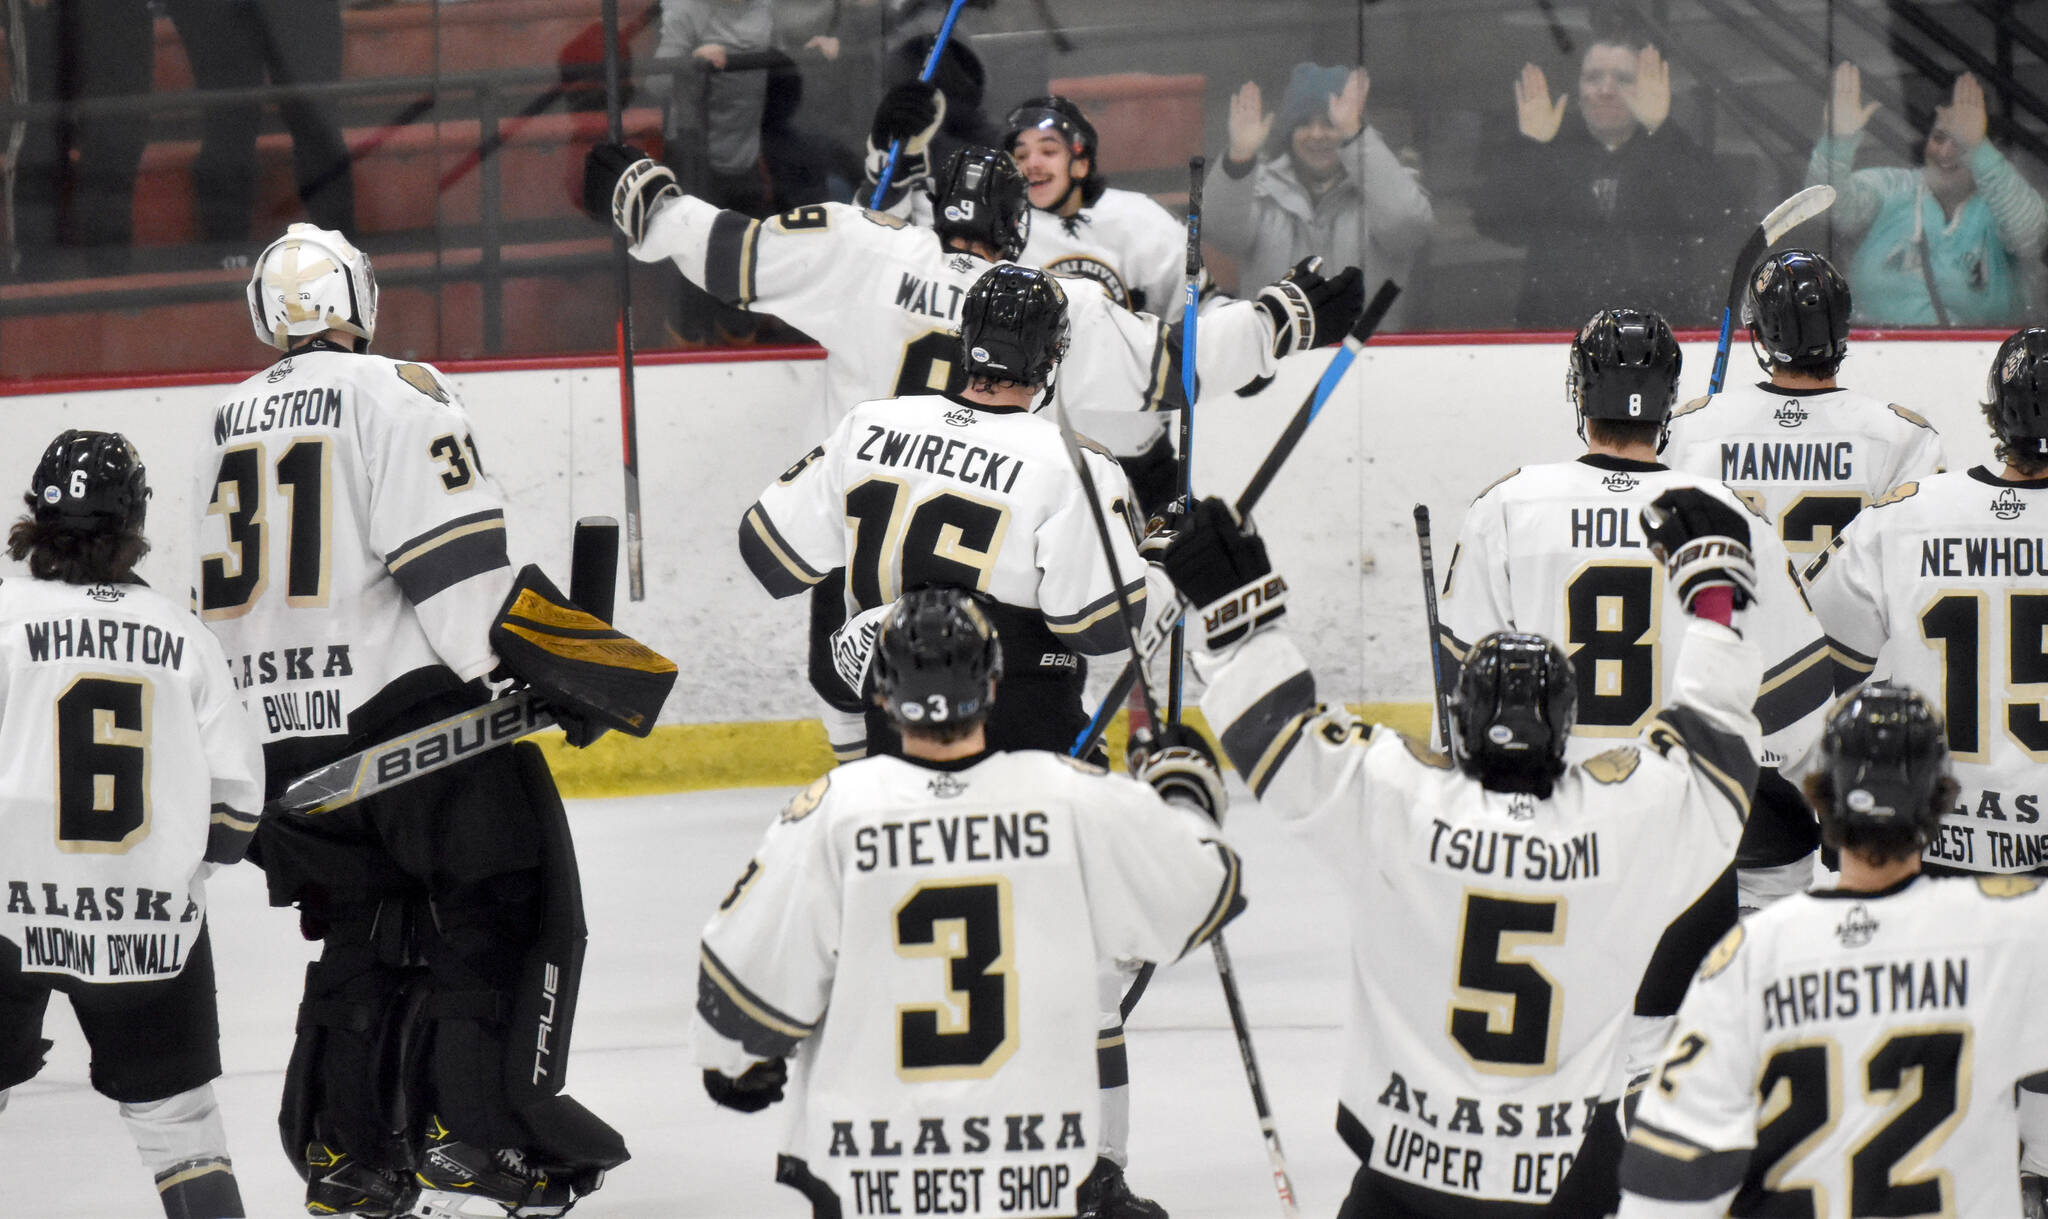 The Kenai River Brown Bears mob Ryan Finch after he scored the game-winning goal in overtime against the Janesville (Wisconsin) Jets on Saturday, Feb. 25, 2023, at the Soldotna Regional Sports Complex in Soldotna, Alaska. (Photo by Jeff Helminiak/Peninsula Clarion)